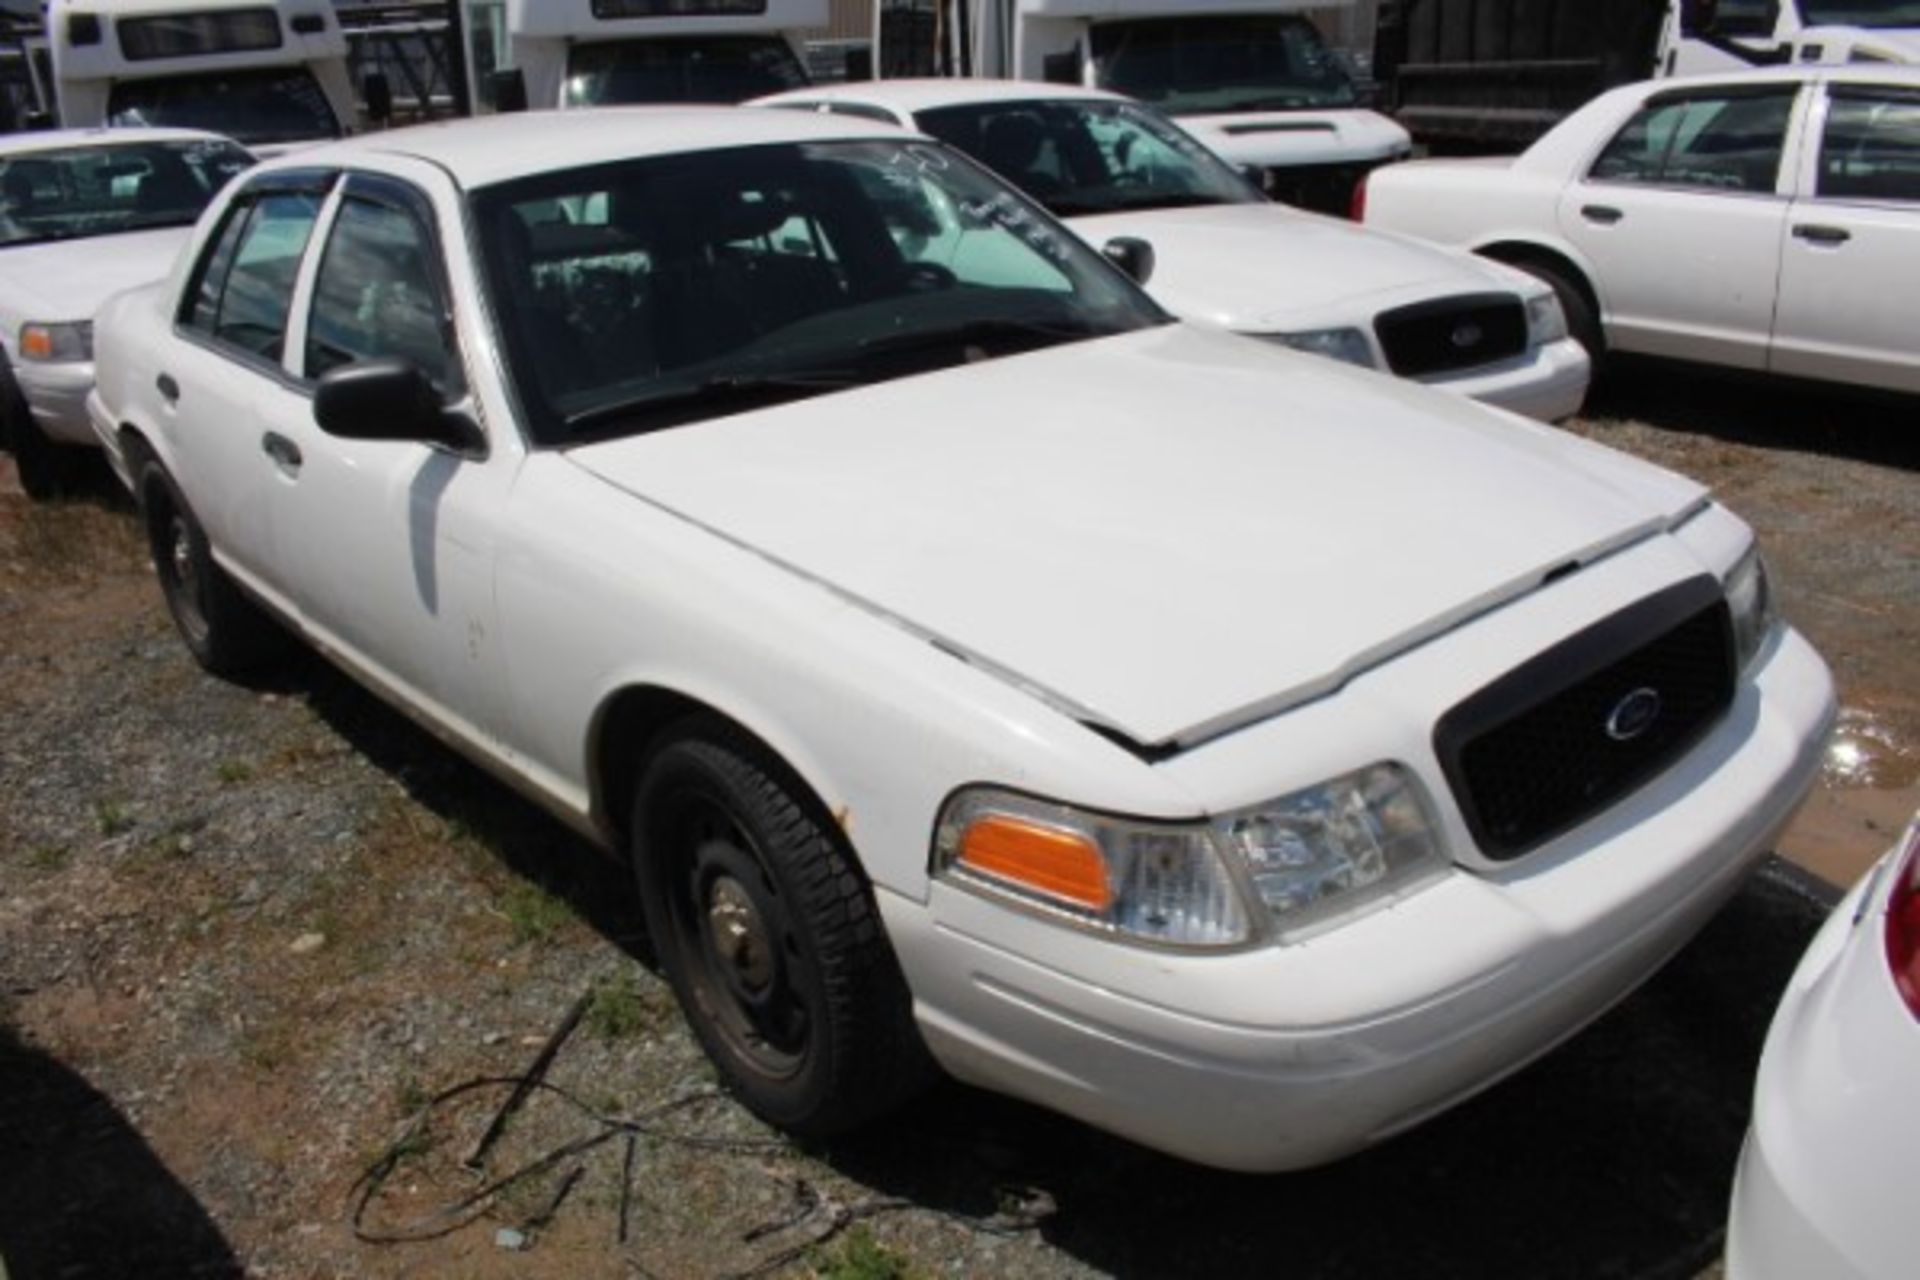 2011 Ford Crown Vic - Image 2 of 6